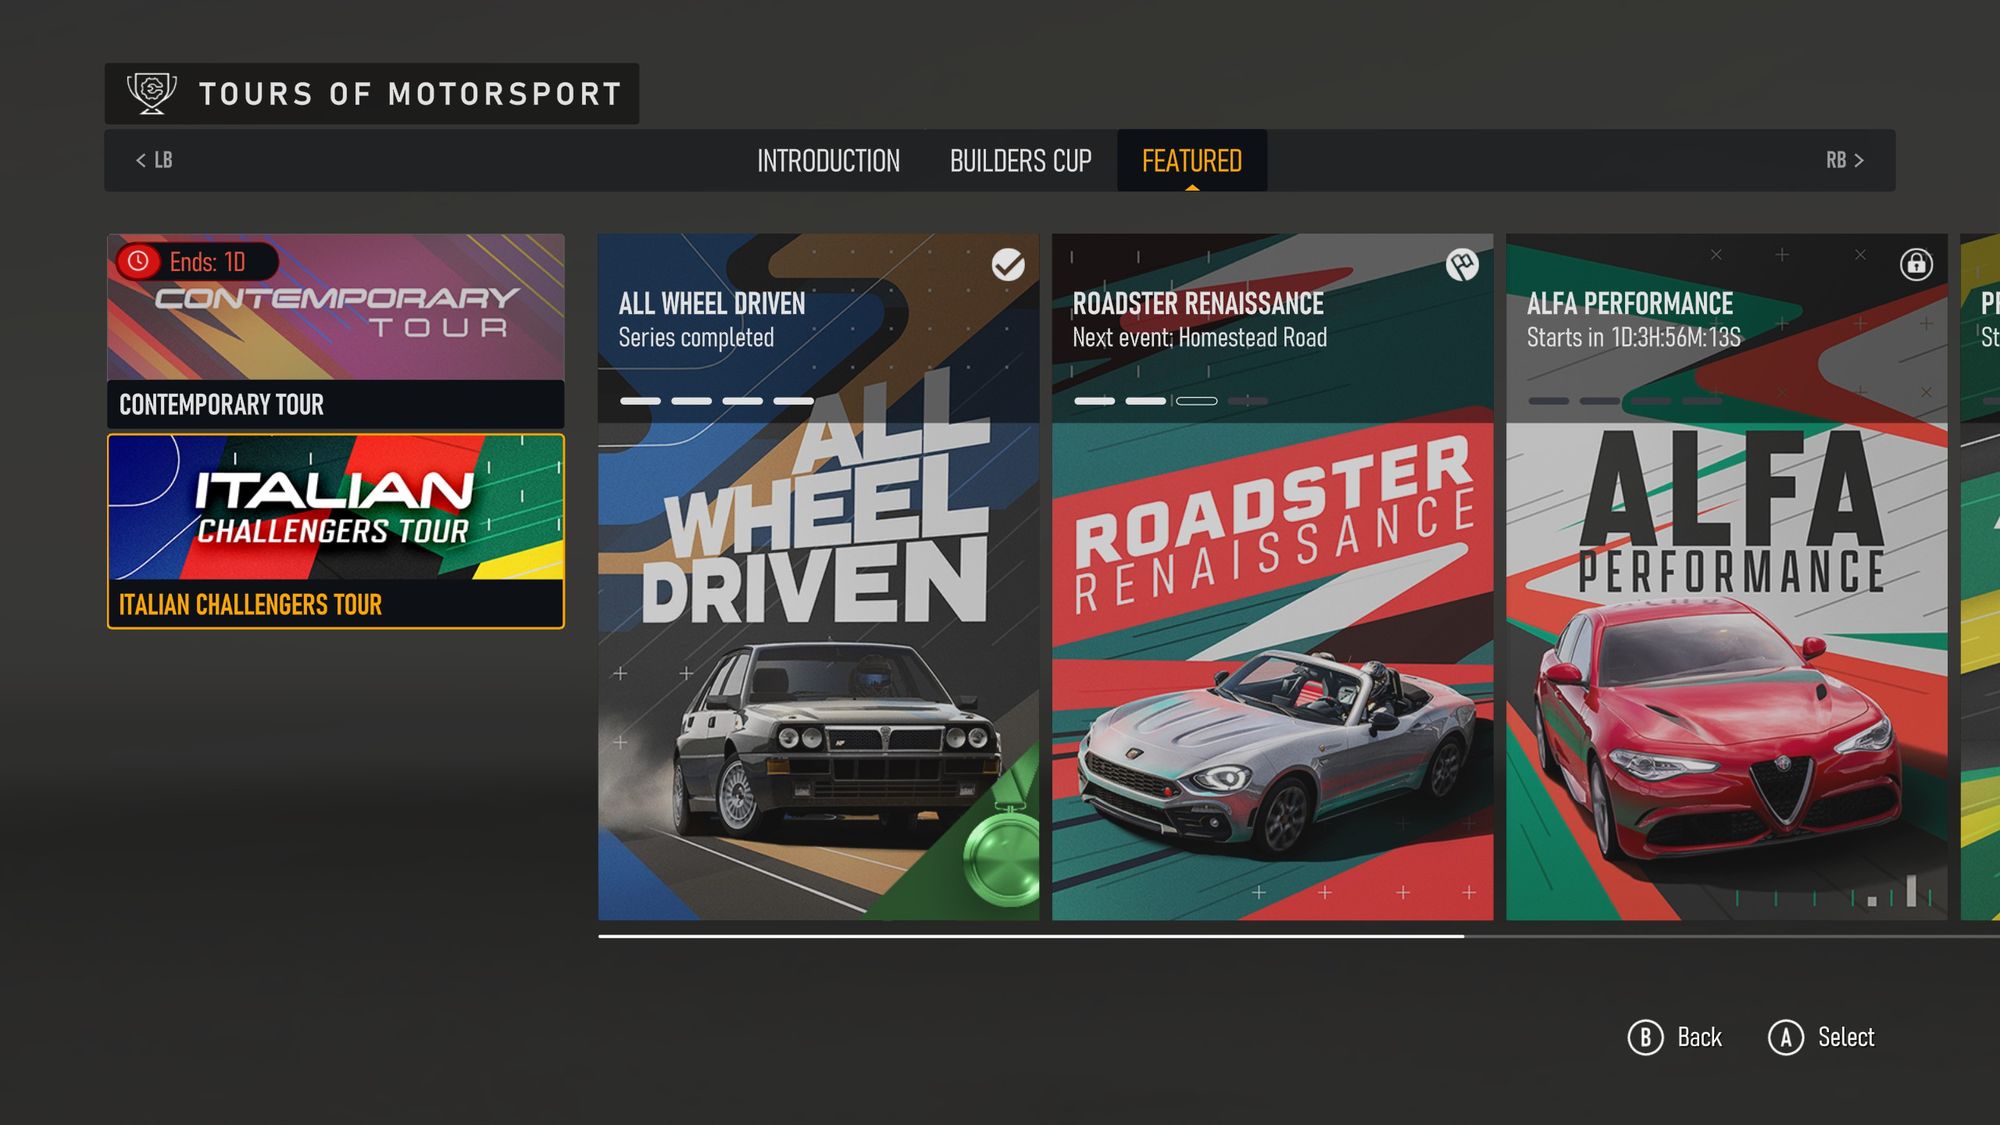 A screenshot of Forza Motorsport's career mode. There are a mere two tours shown, one of which has a prominent "Ends: 1D" badge.